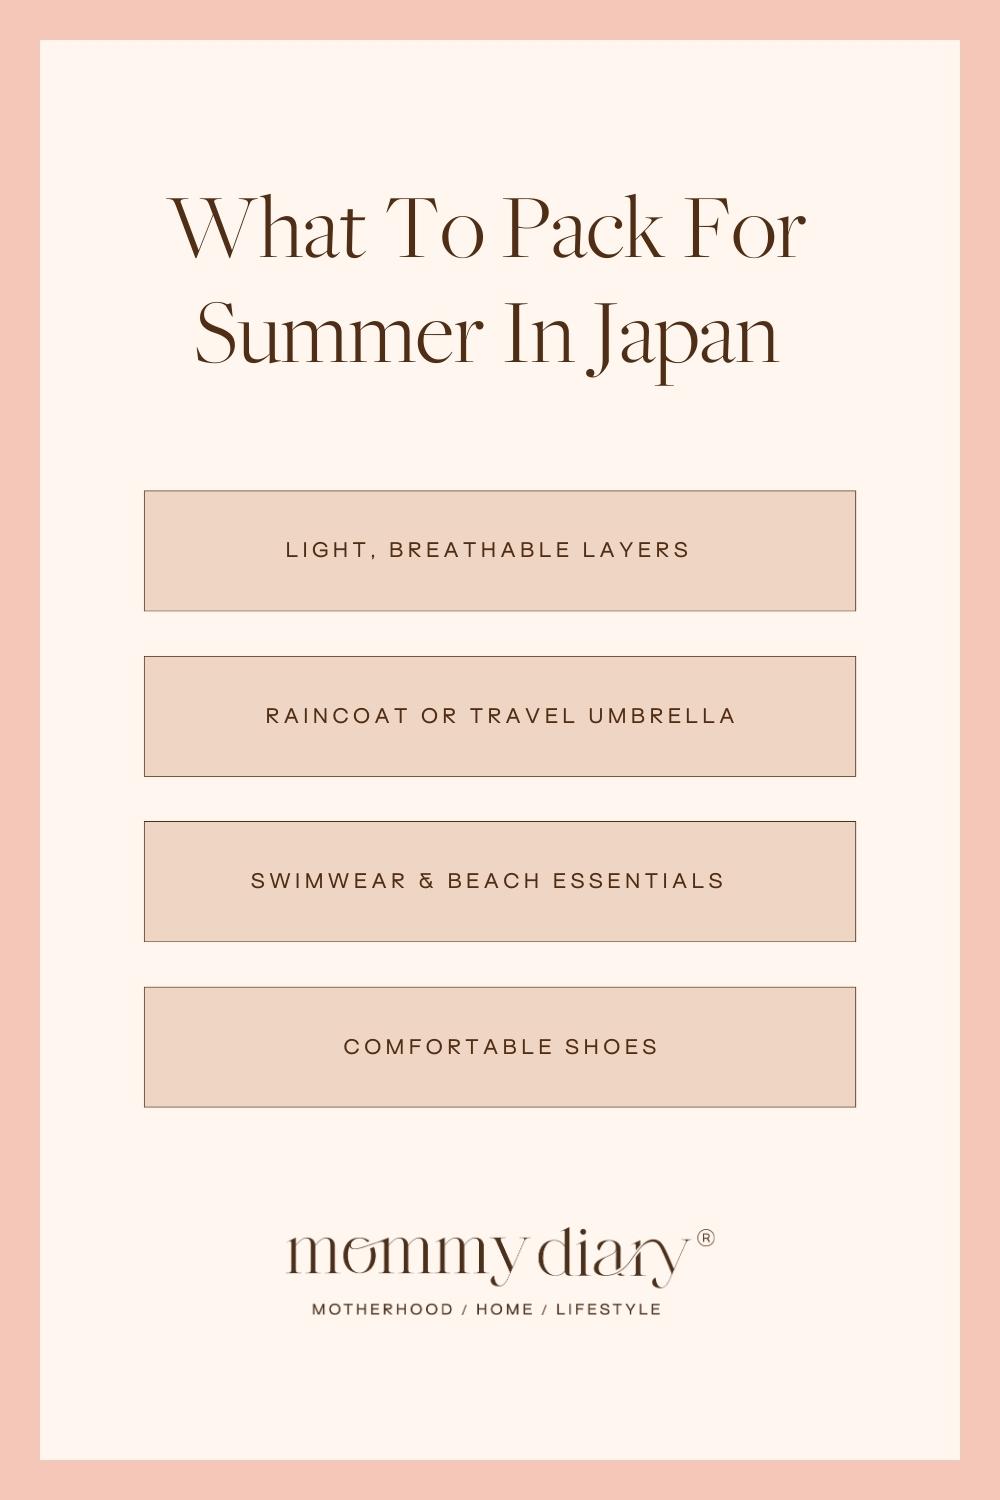 What To Pack For Summer in Japan